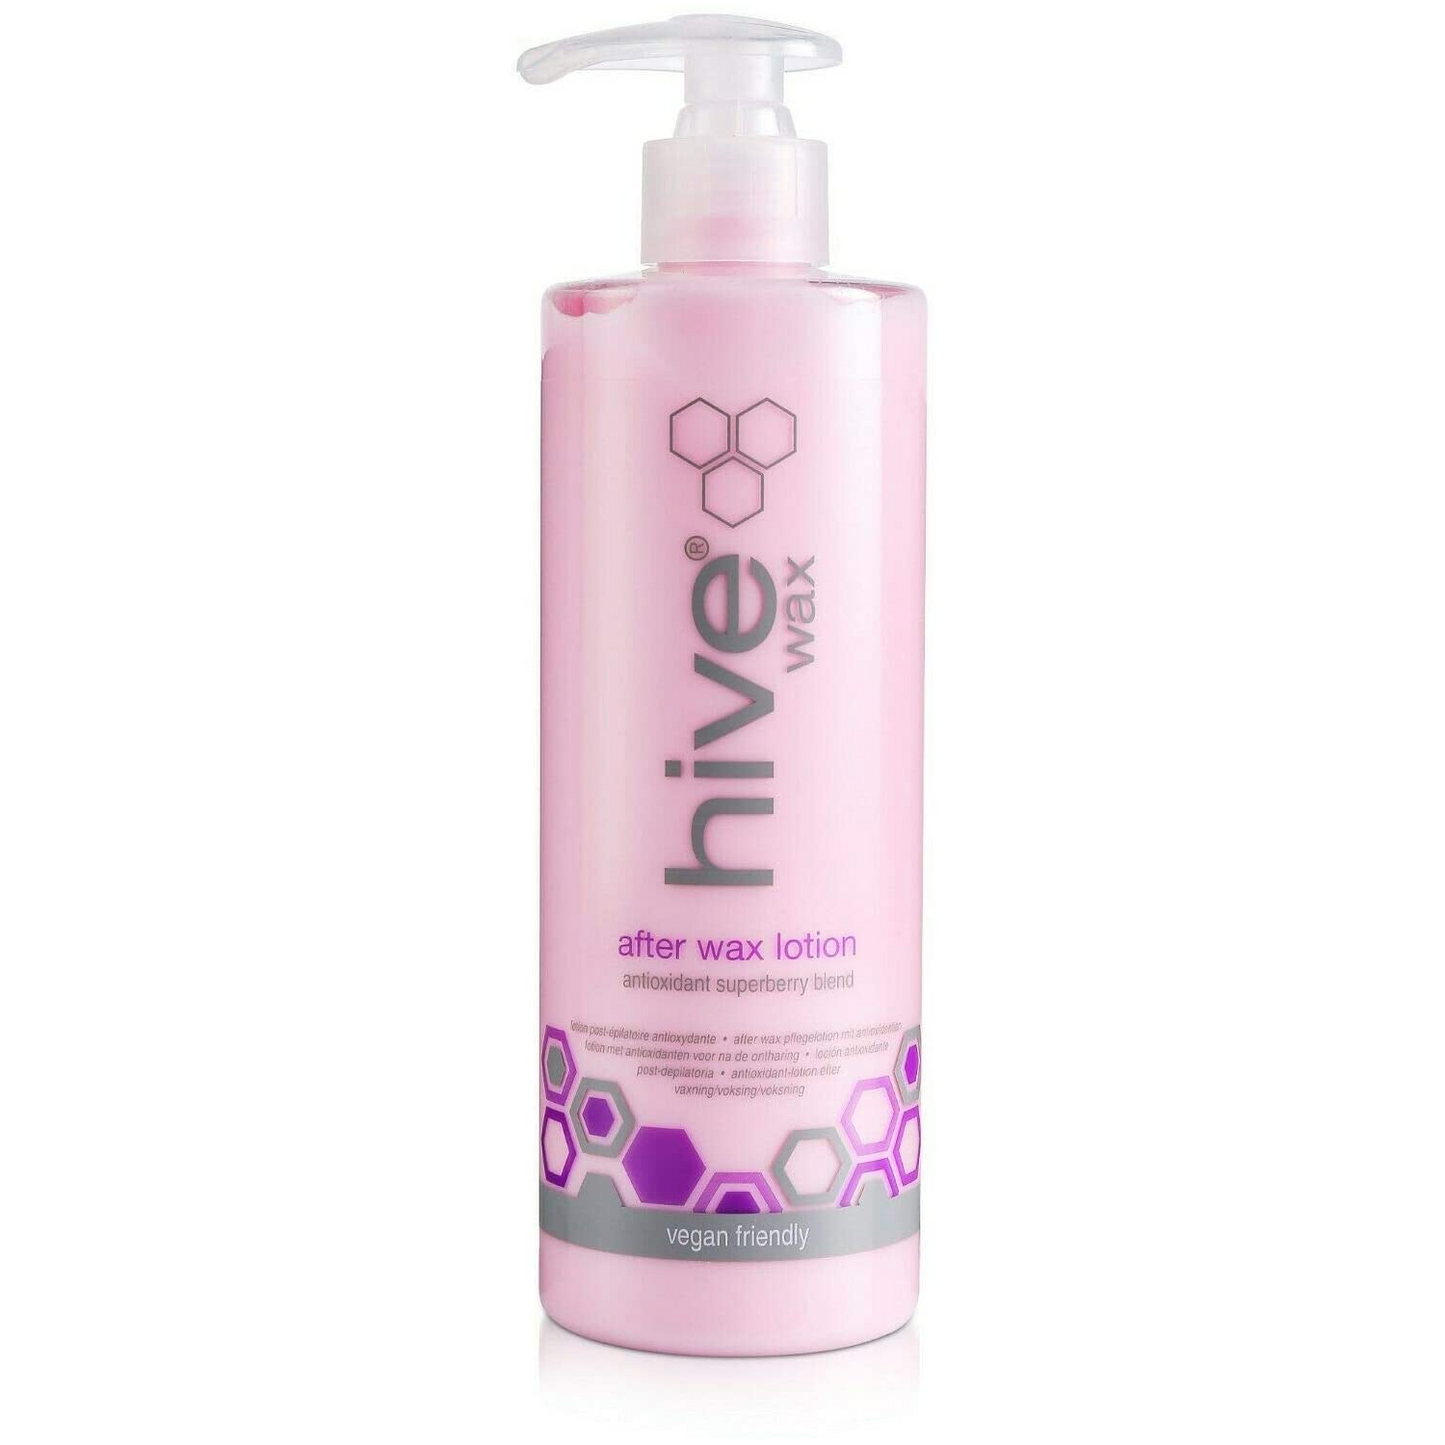 Hive Superberry Blend Antioxidant After Wax Lotion 400ml